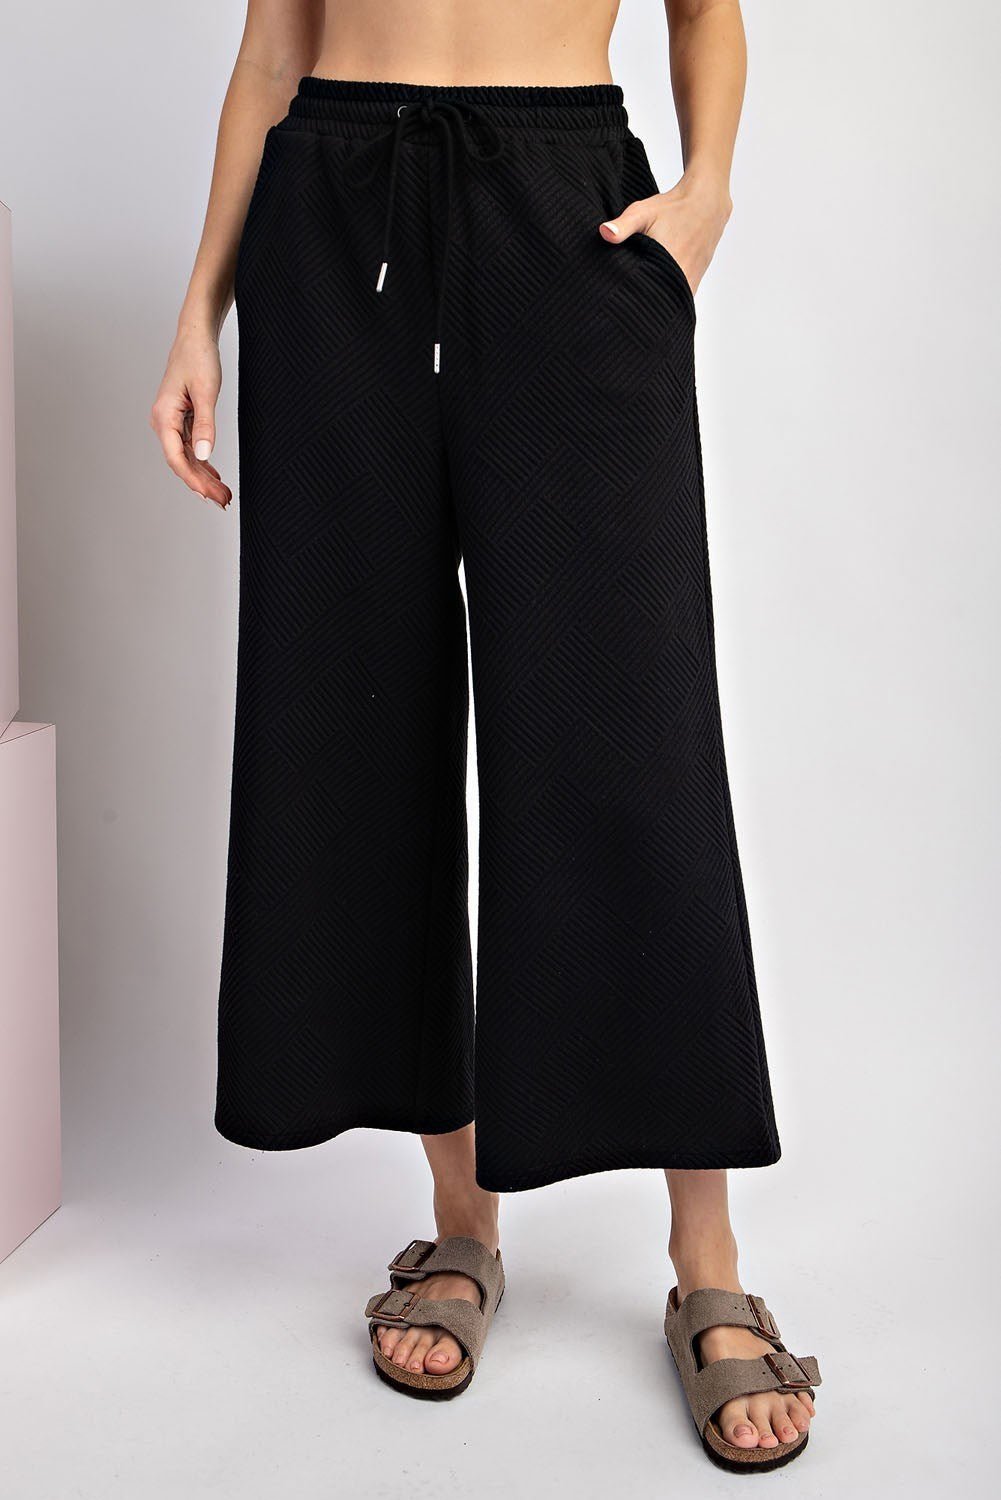 Textured Relaxed Pants - Modish Maven Boutique